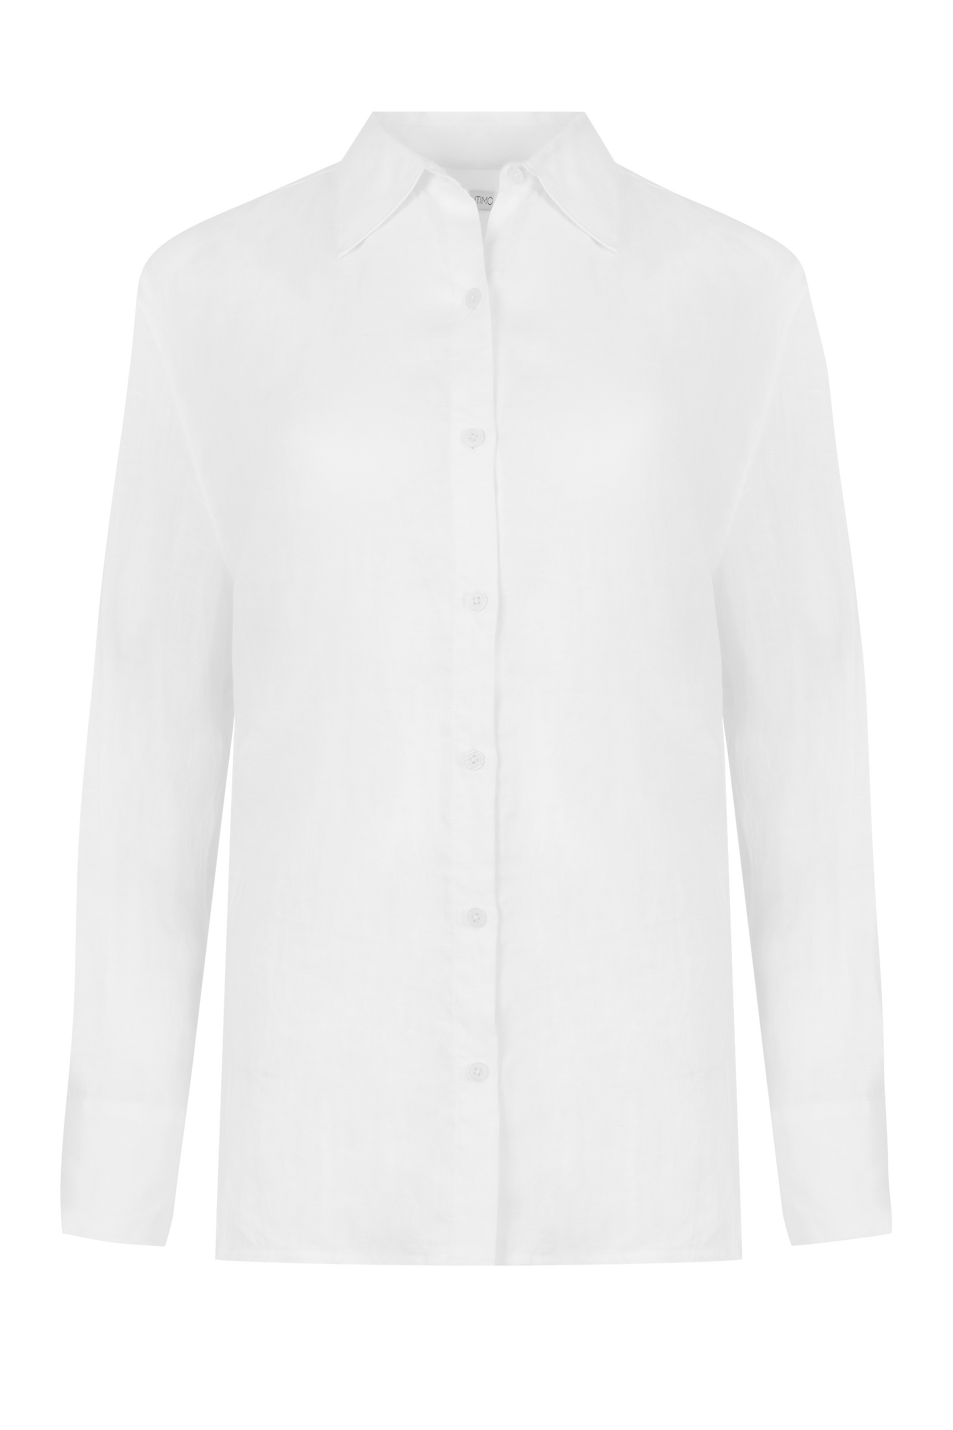 Buy LINEN SHIRT online at Intimo